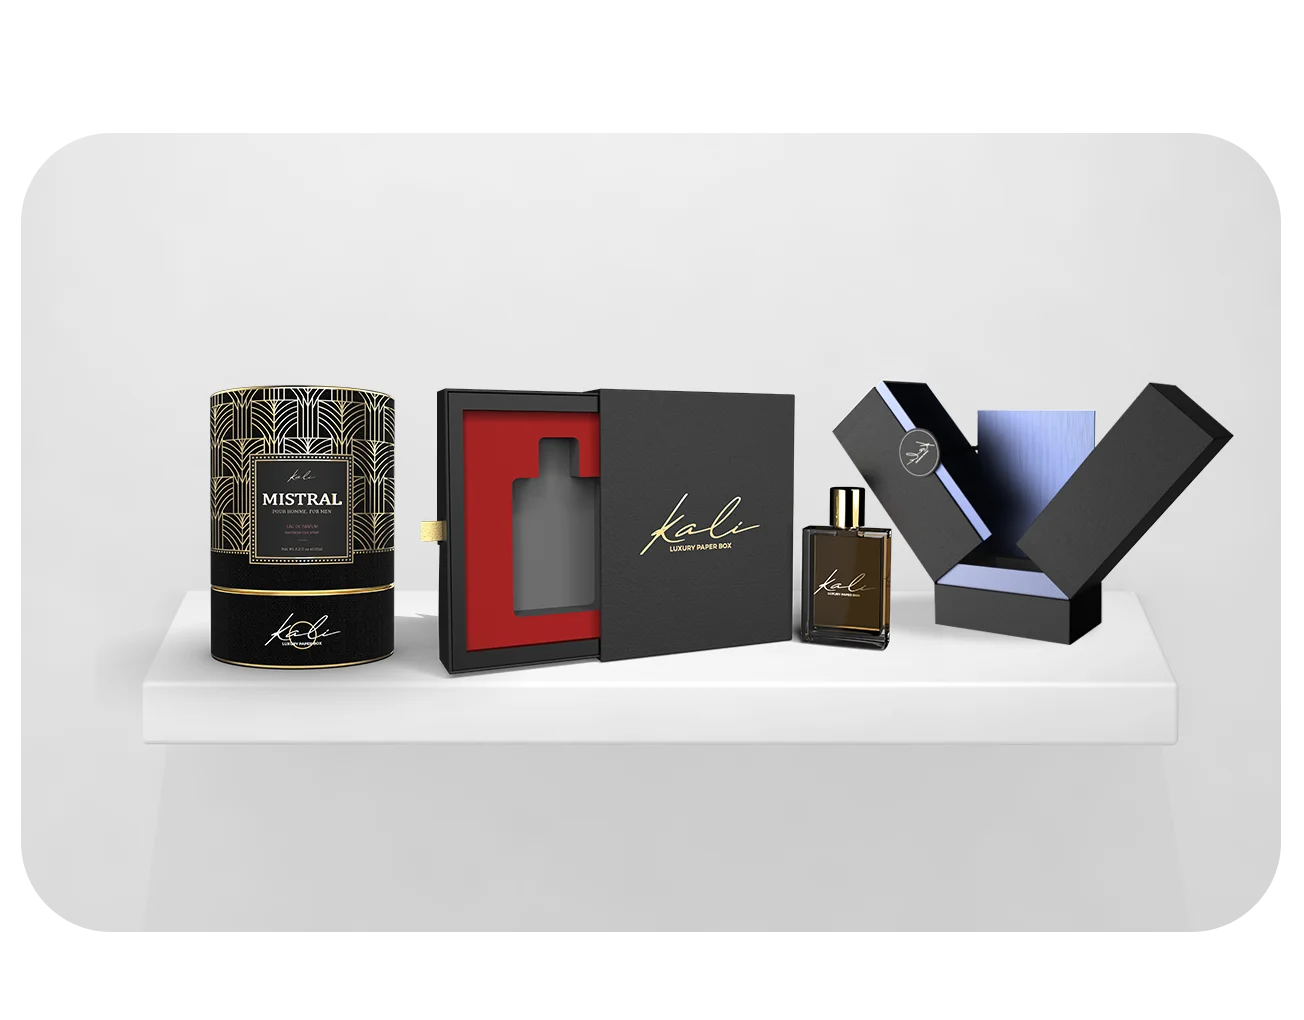 Custom Perfume Boxes Wholesale - Perfume Gift Boxes & Packaging ...